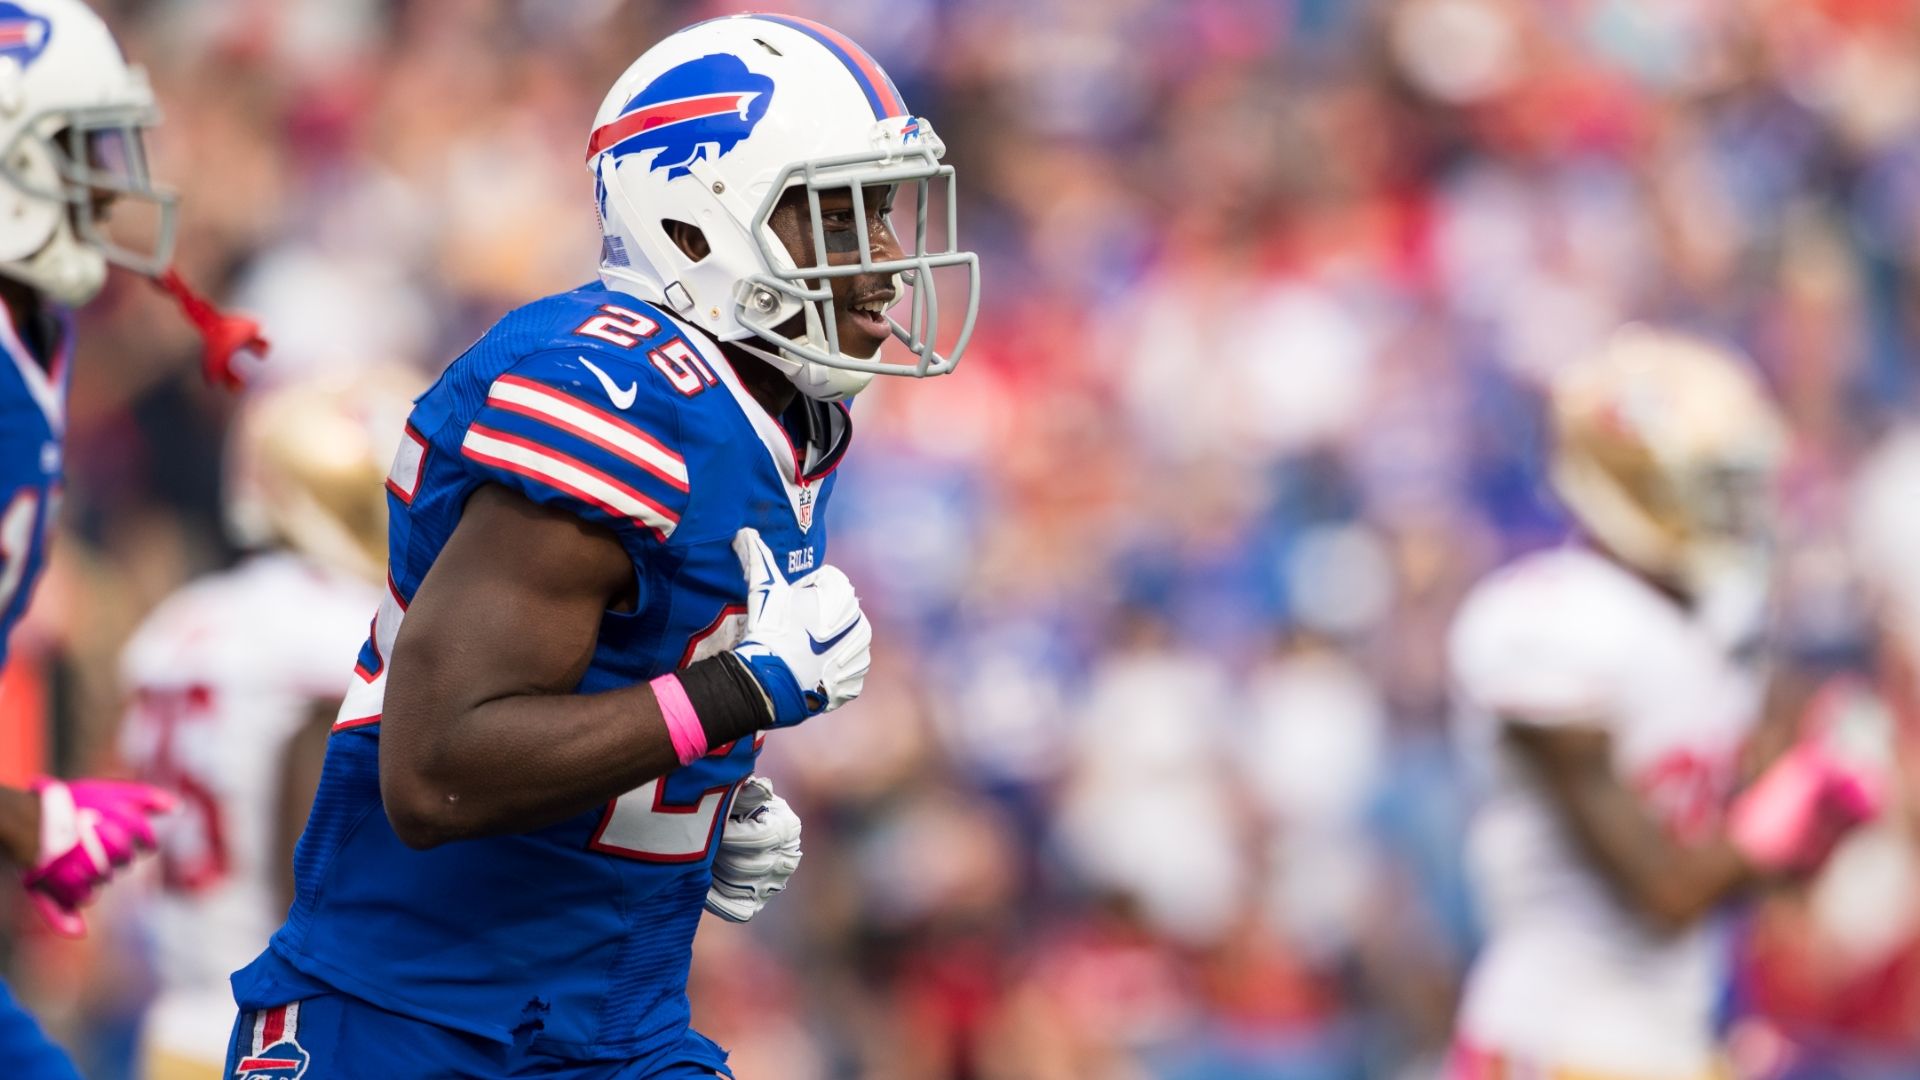 McCoy injury could be huge loss for Bills